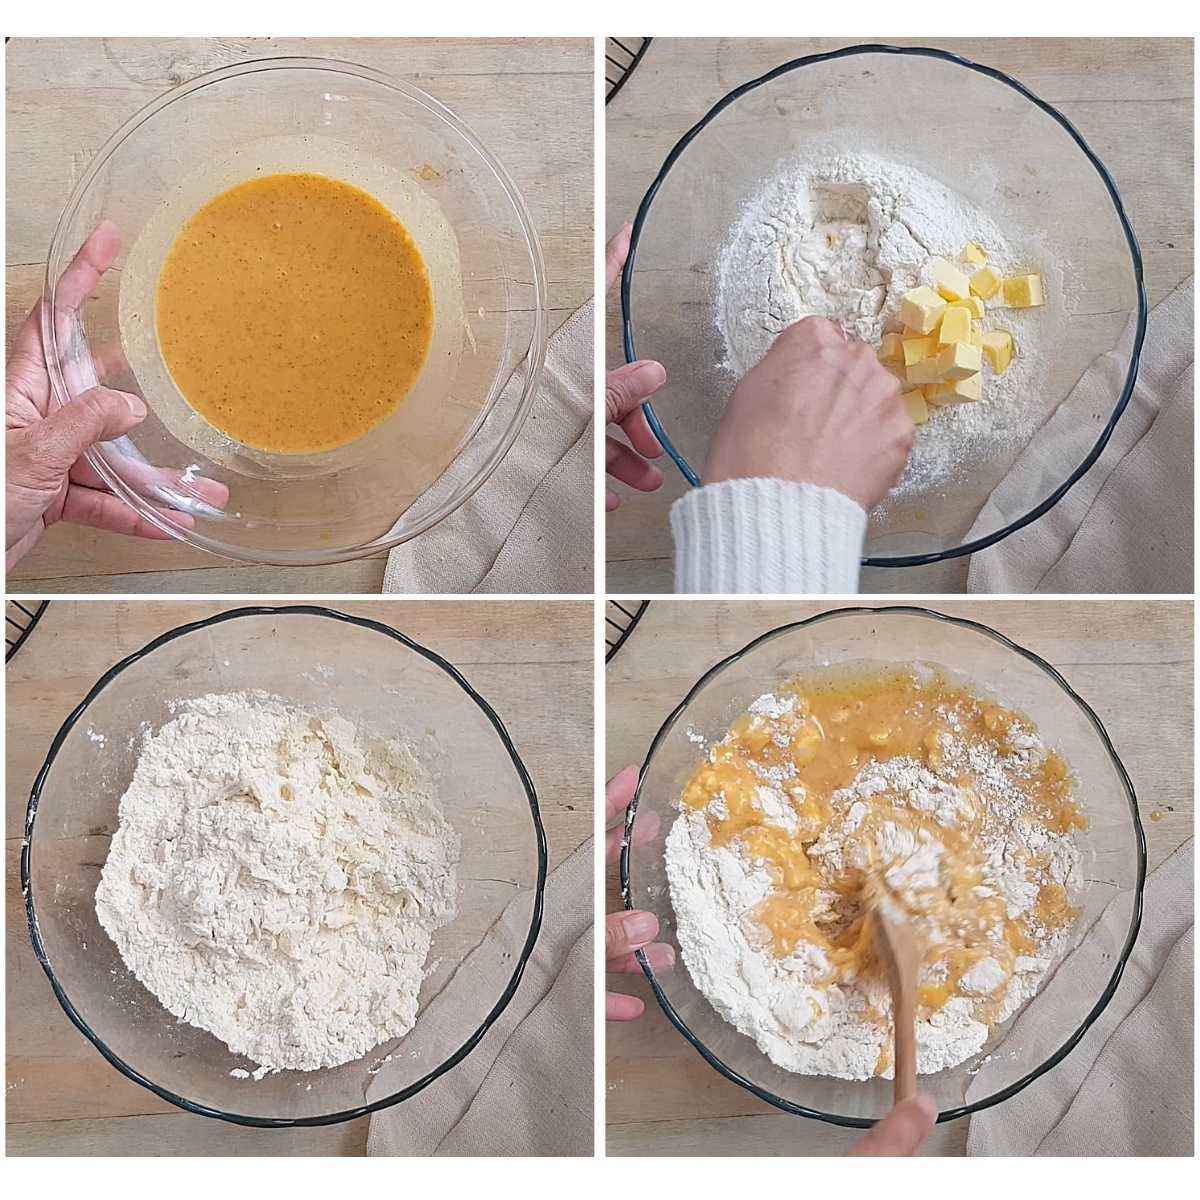 Making and combining the wet and dry mixture to make eggless pumpkin scones.